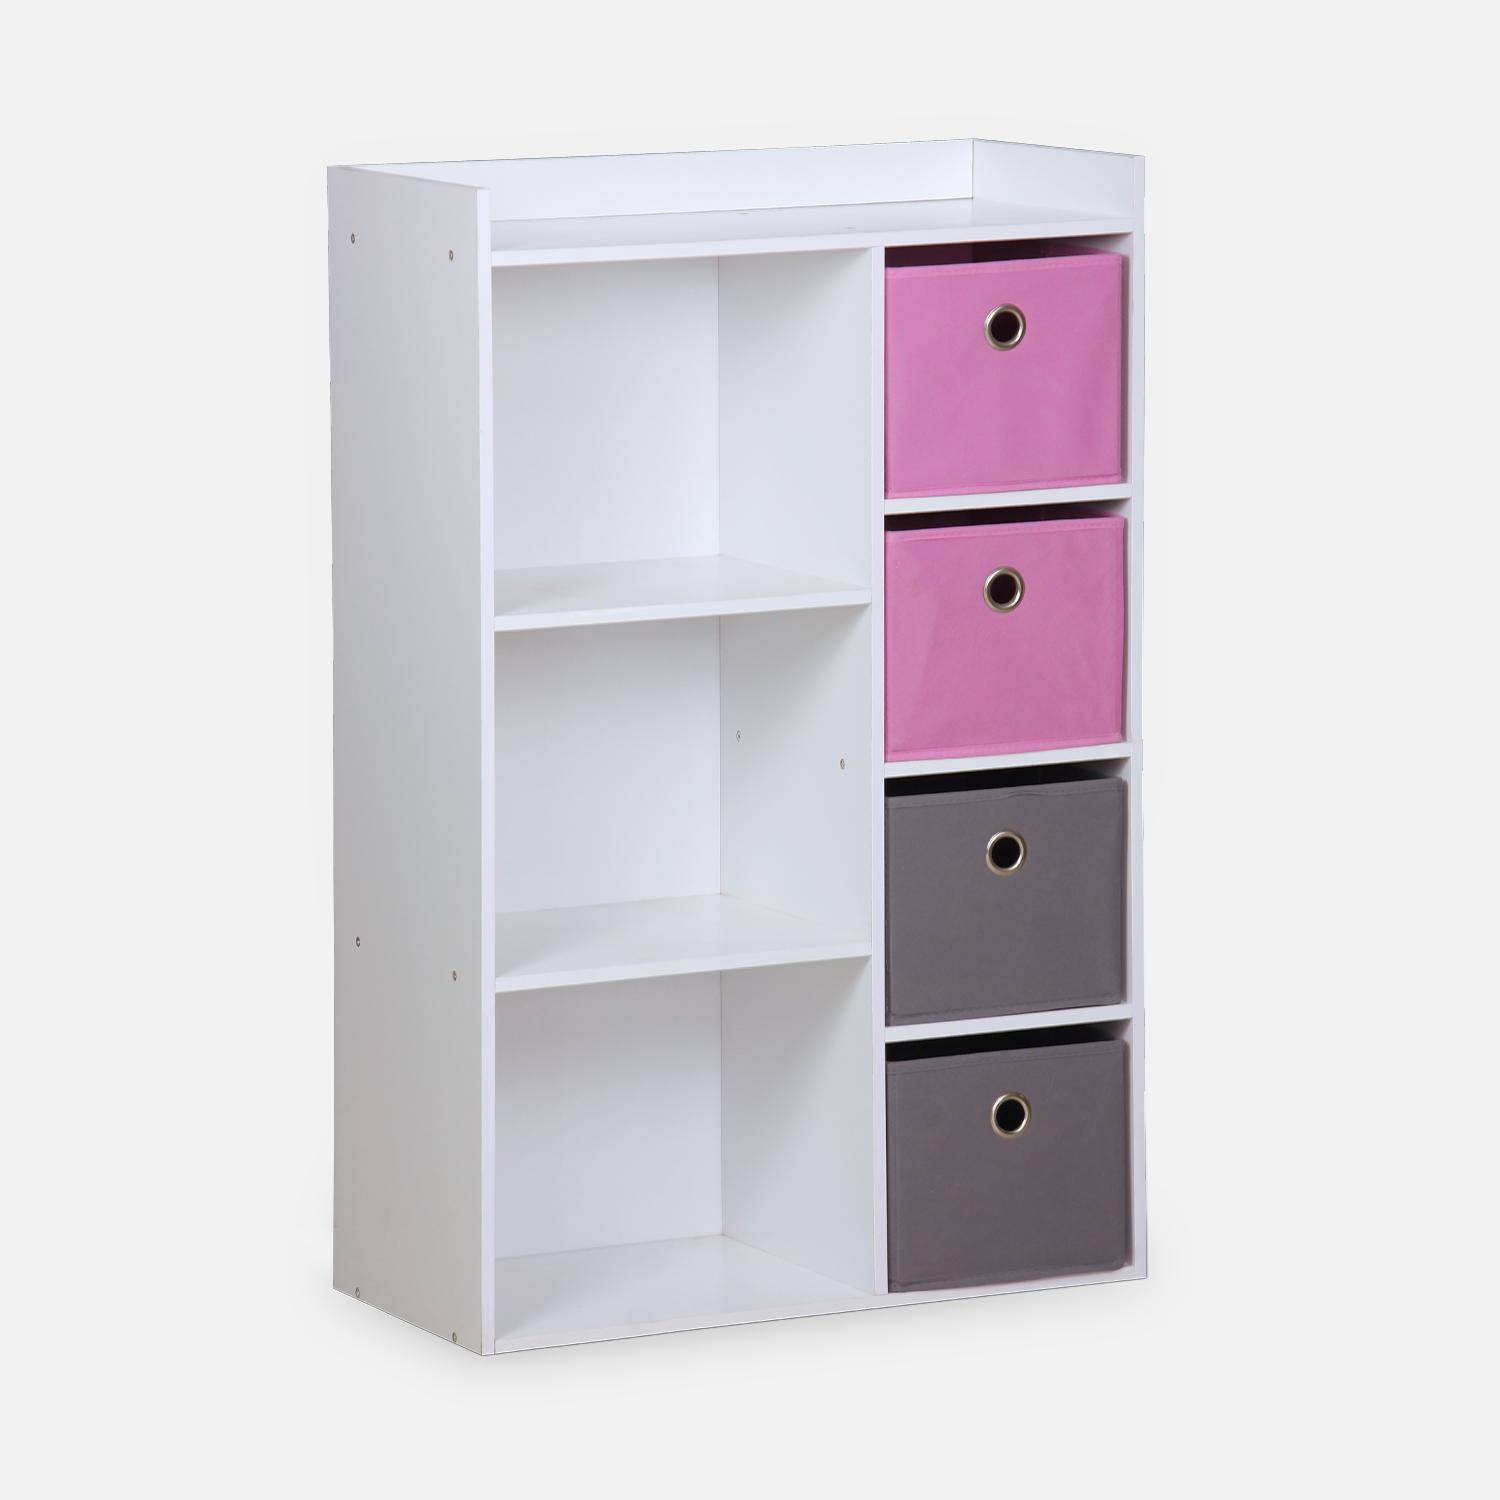 Storage unit for kids, white - Camille - with 7 compartments and 4 baskets in grey and pink,sweeek,Photo3